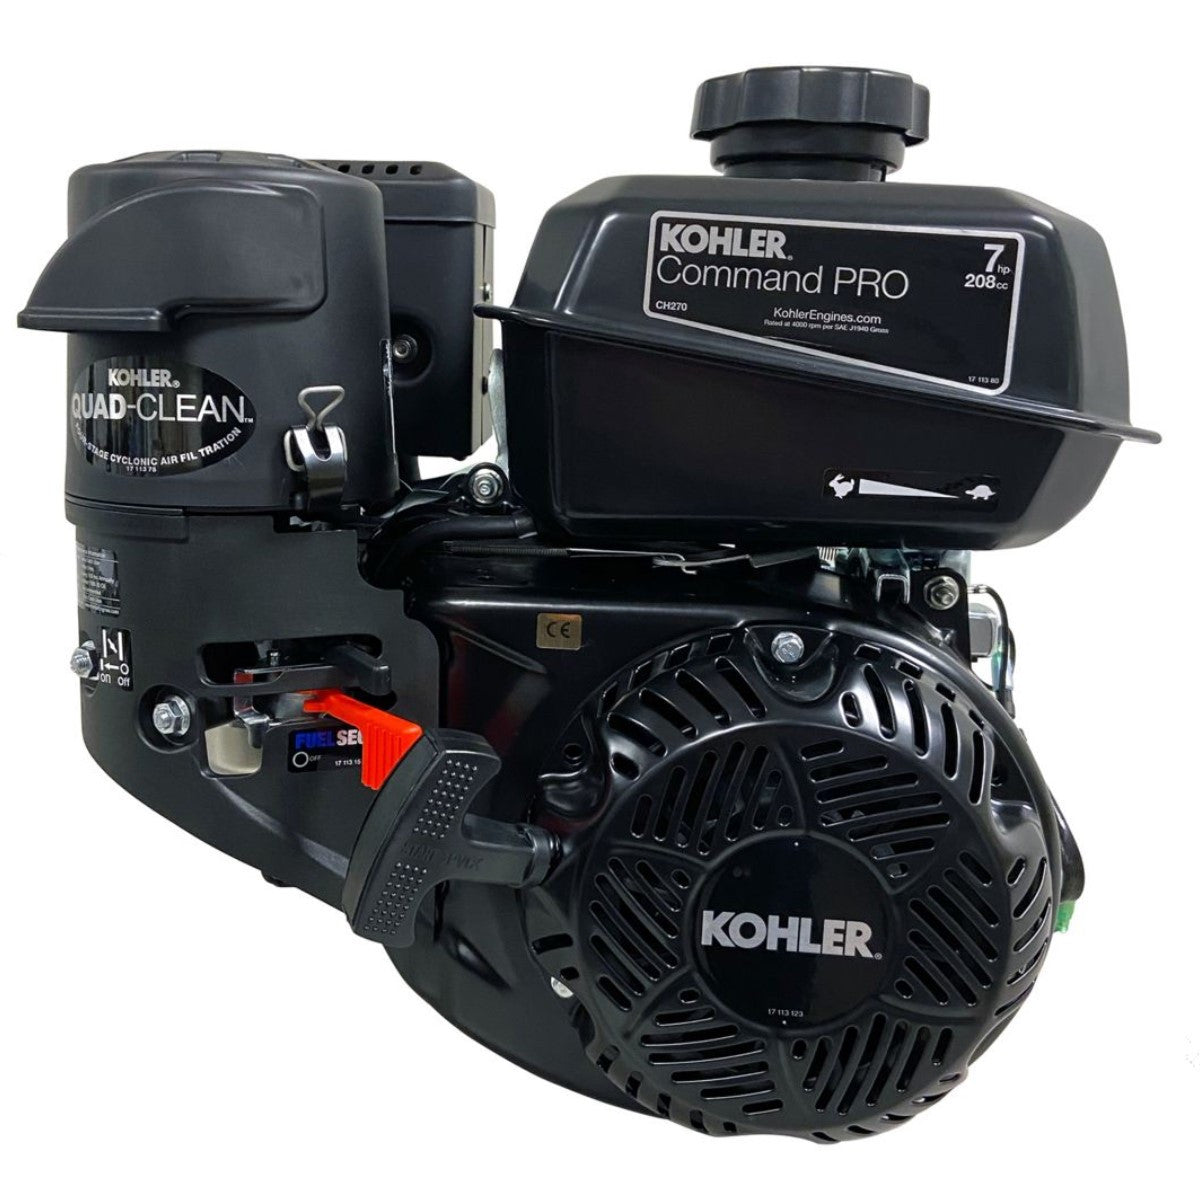 Kohler Command Pro 7HP Replacement Engine #CH270-3243